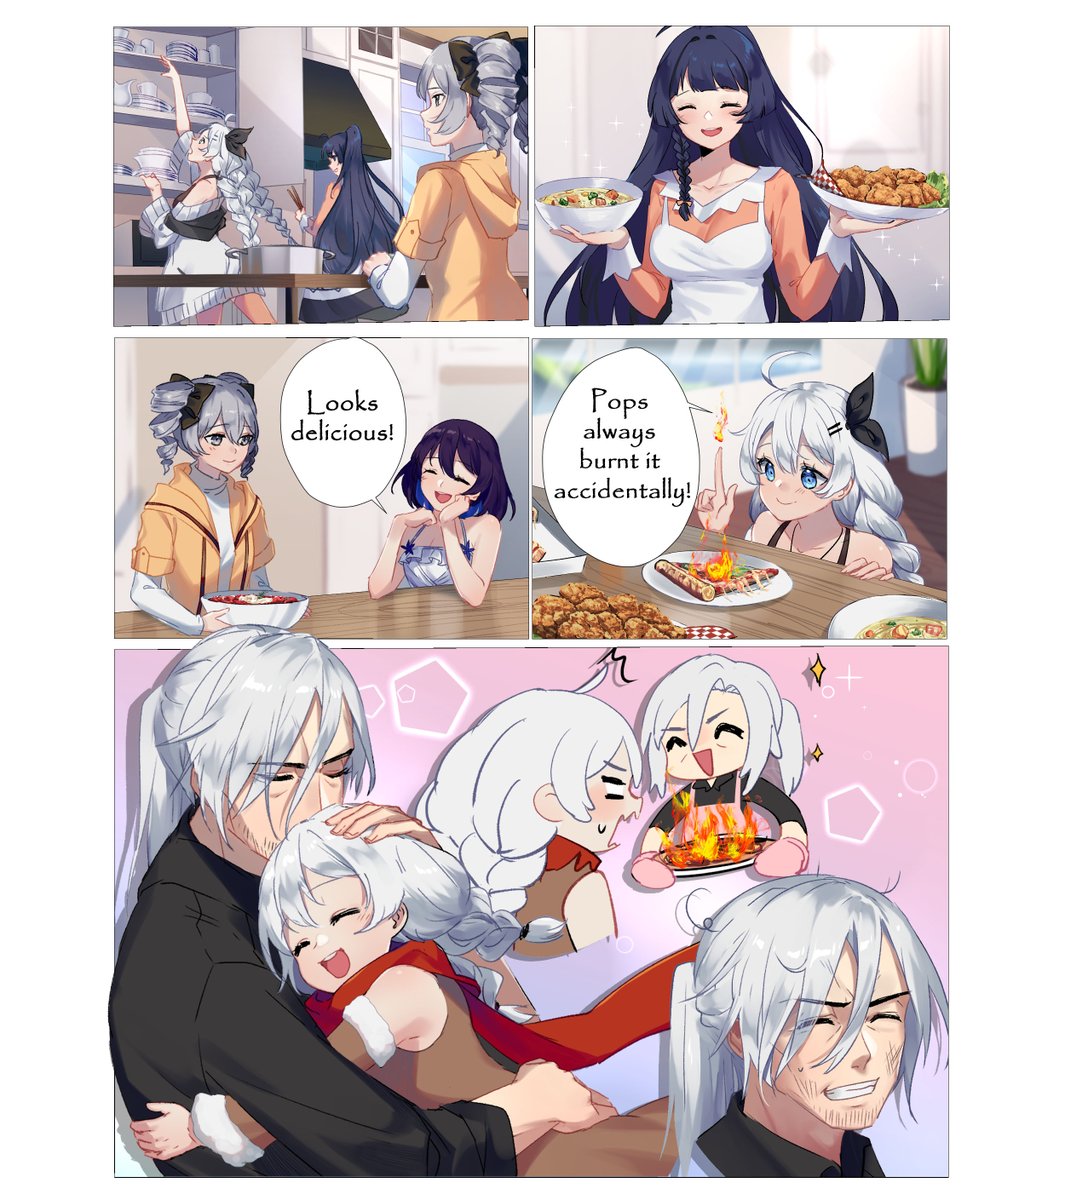 Valkyries' Anniversary Trip: 4th-Anniversary Party
 
 It's party time!
 Check out what specialties everyone made!
 
 Kudos to Captain @me_zwa for the amazing fan art!
 
 #GLB4thAnni
 #BeckoningHorizon
 #HonkaiImpact3rd 